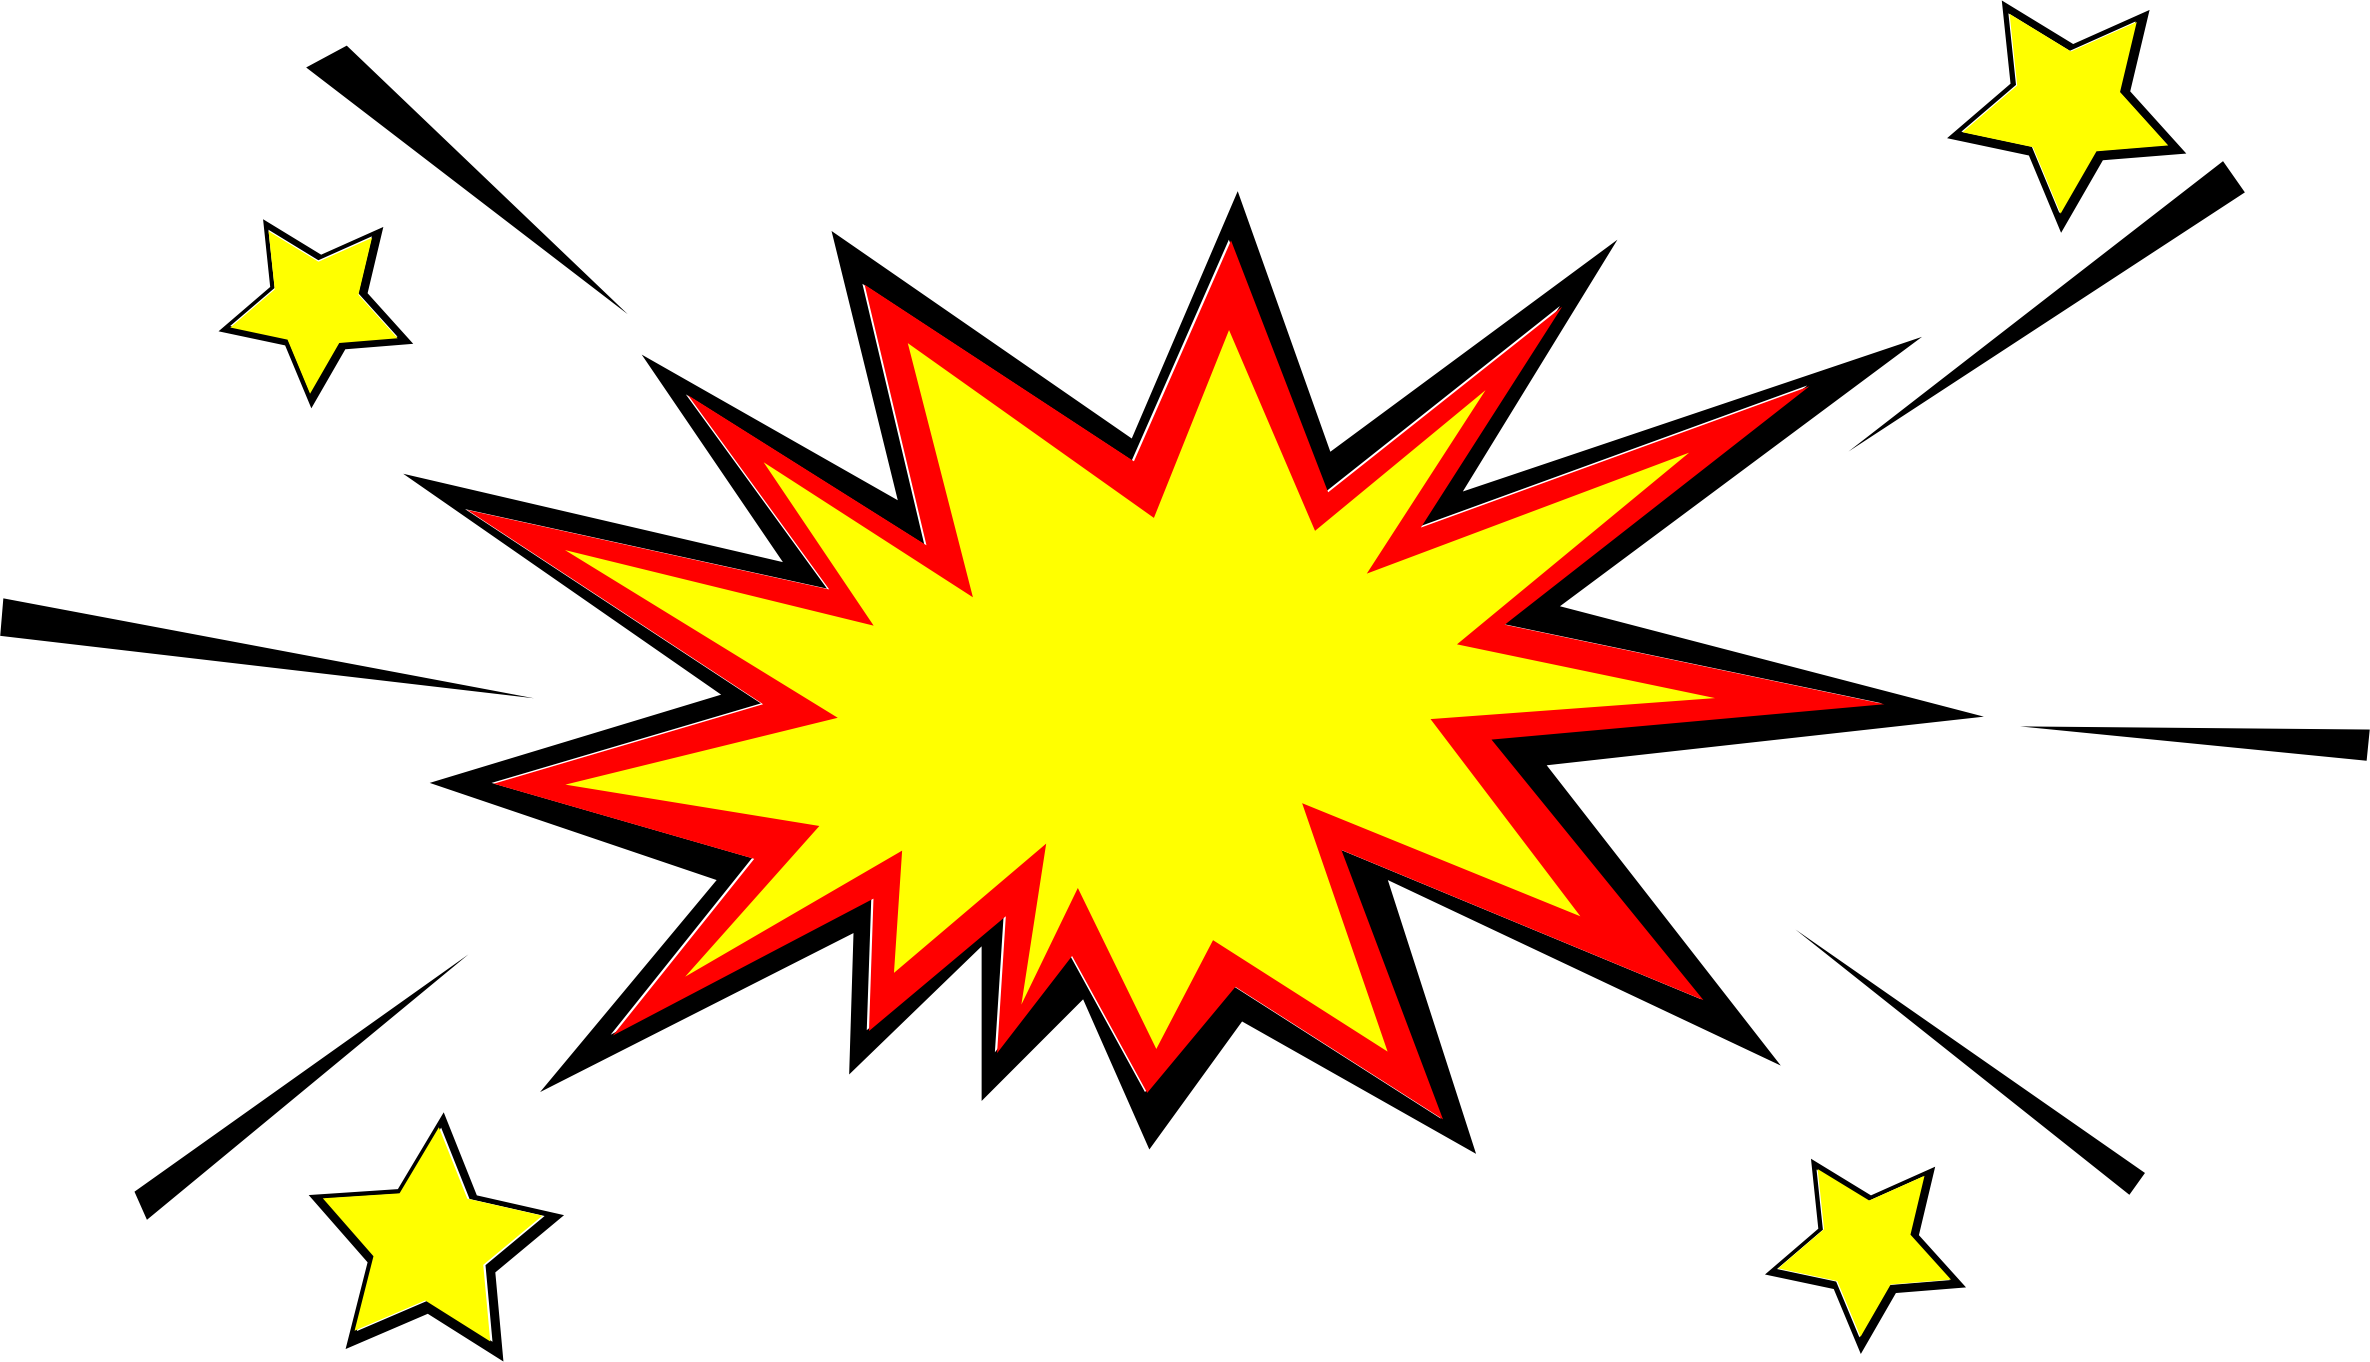 Free Cartoon Explosion Png, Download Free Cartoon Explosion Png png images, Free ClipArts on